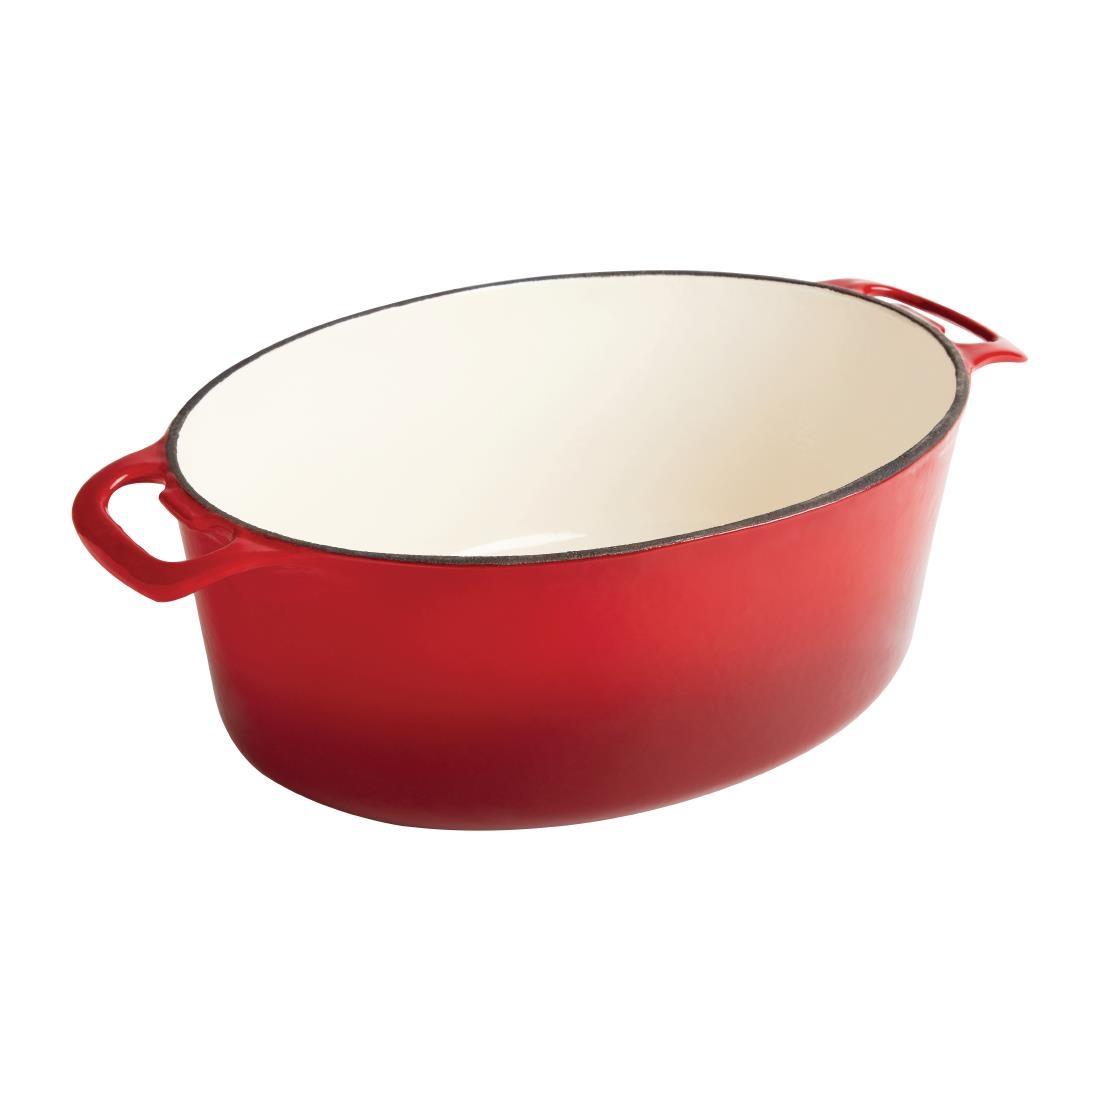 Vogue Red Oval Casserole Dish 5Ltr - GH313  - 2